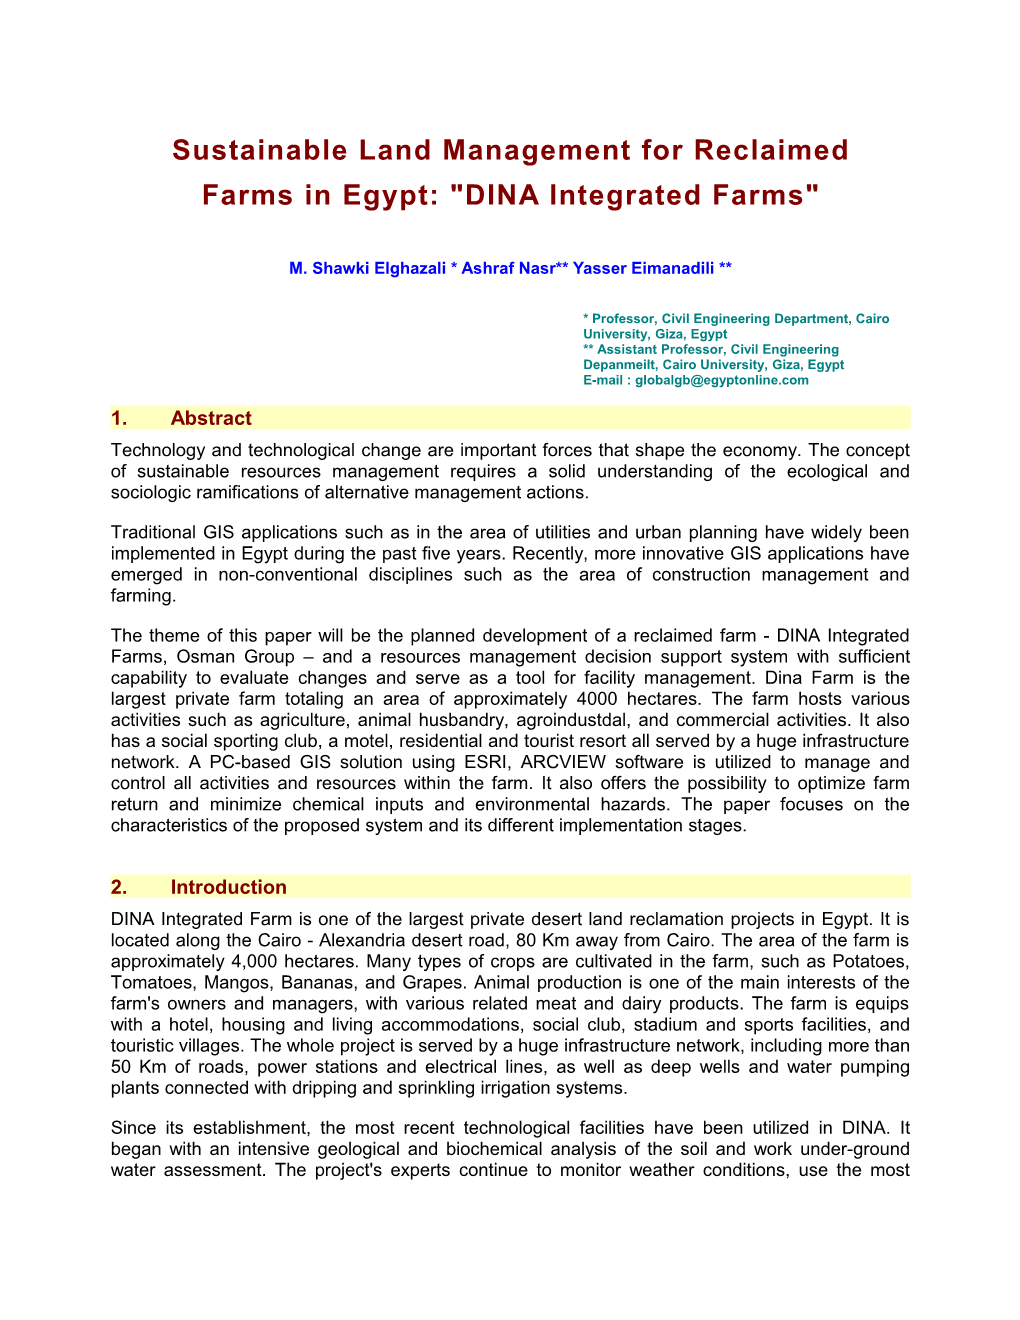 Sustainable Land Management for Agricultural Reclaimed Farms in Egypt DINA Integrated Farms